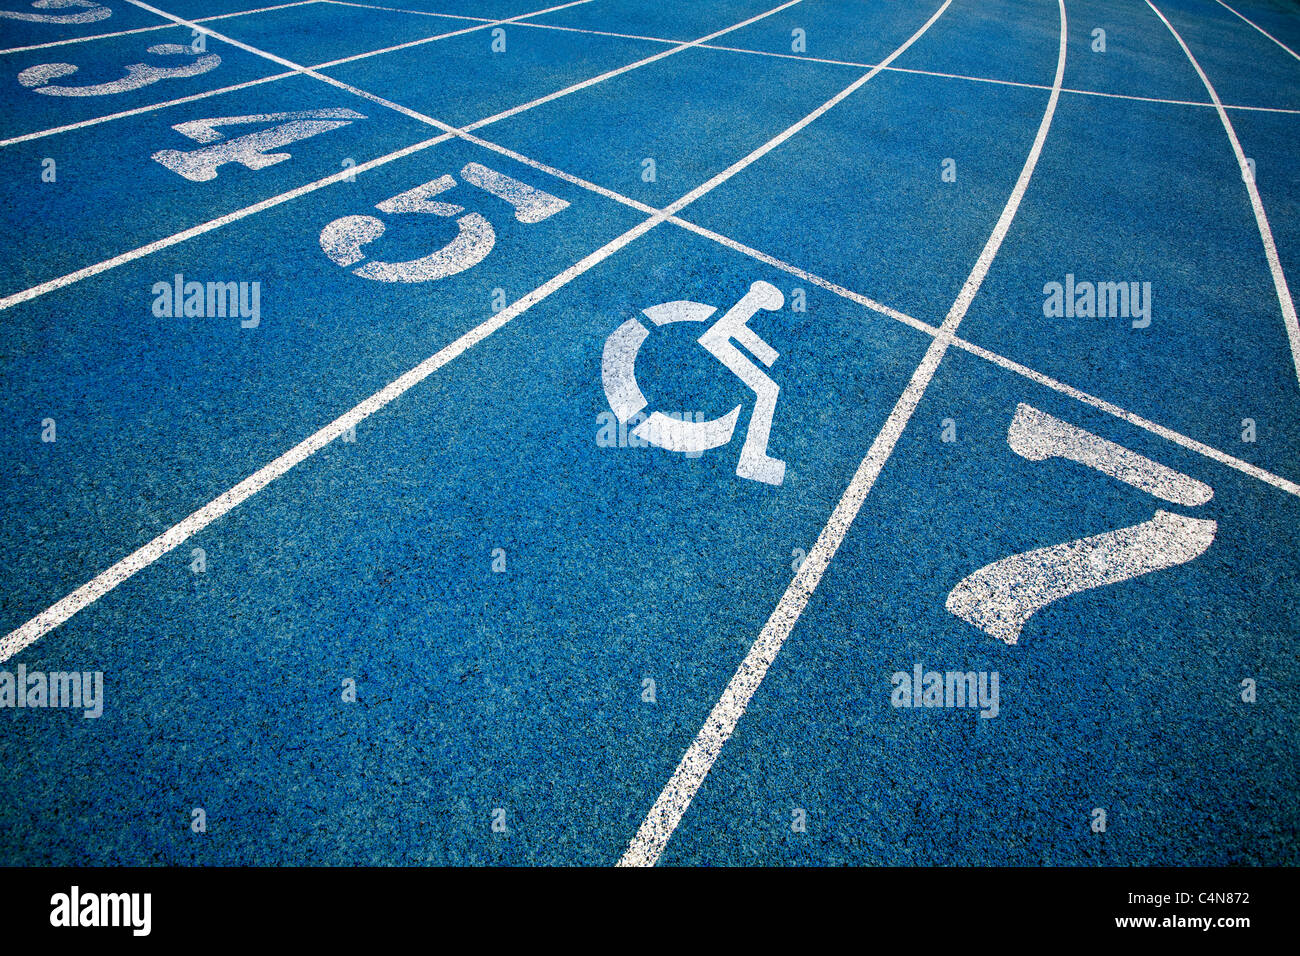 Handicap wheelchair icon superimposed on top of running track. Stock Photo